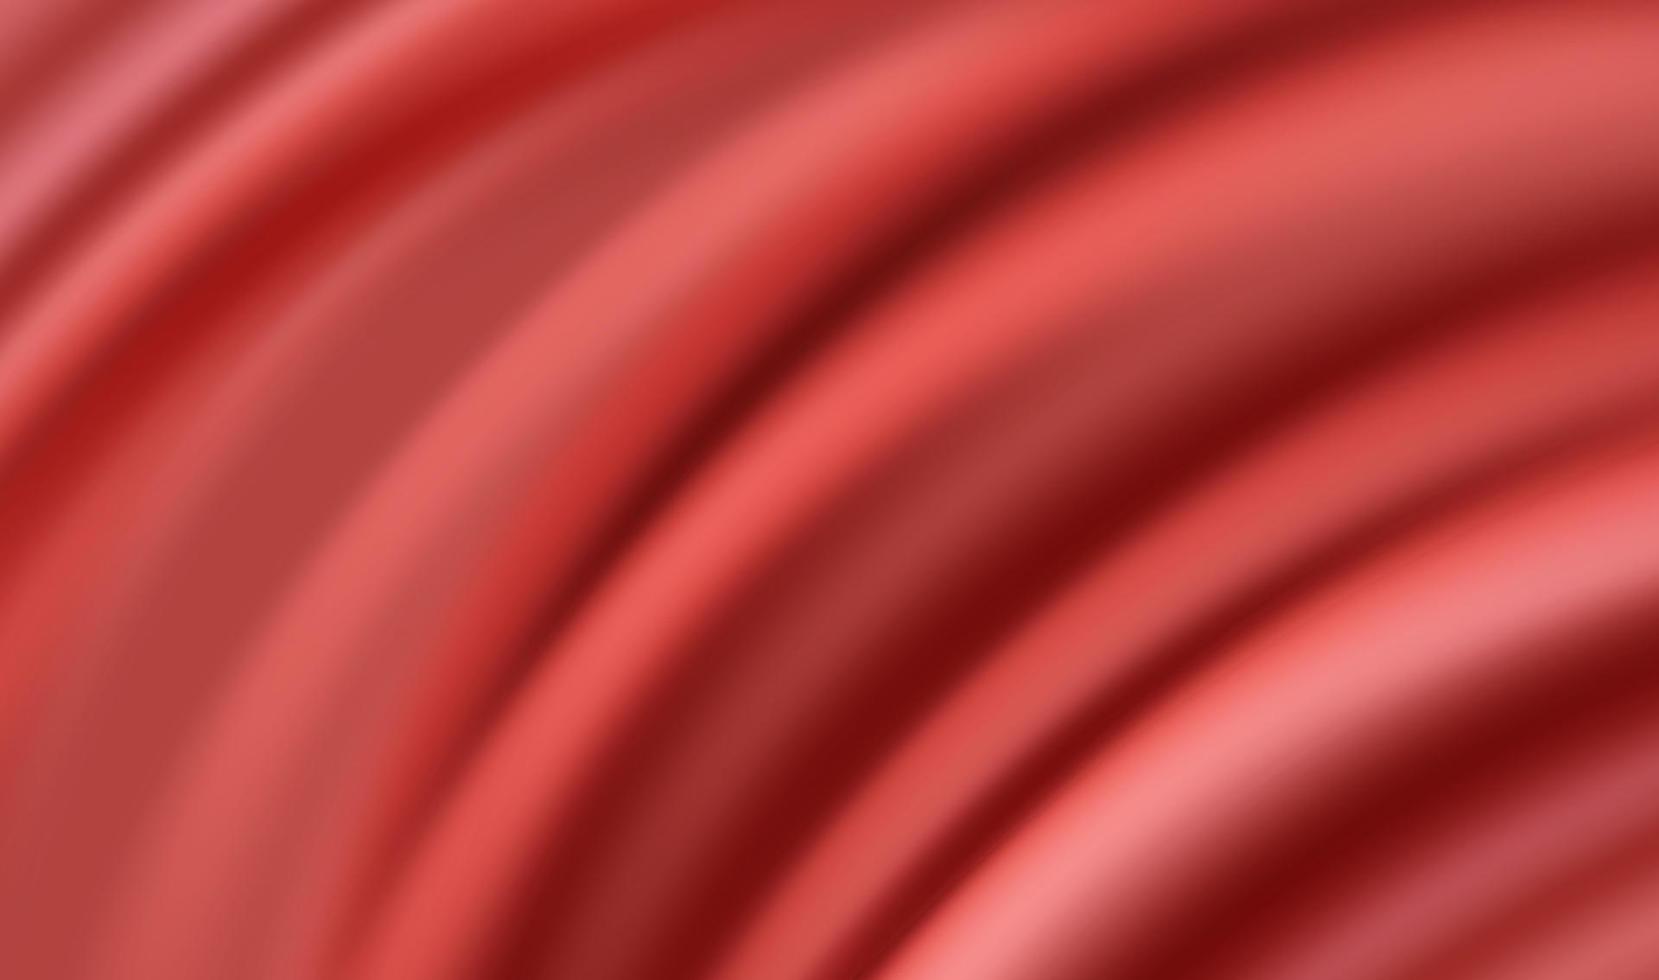 Red satin fabric against vector realistic